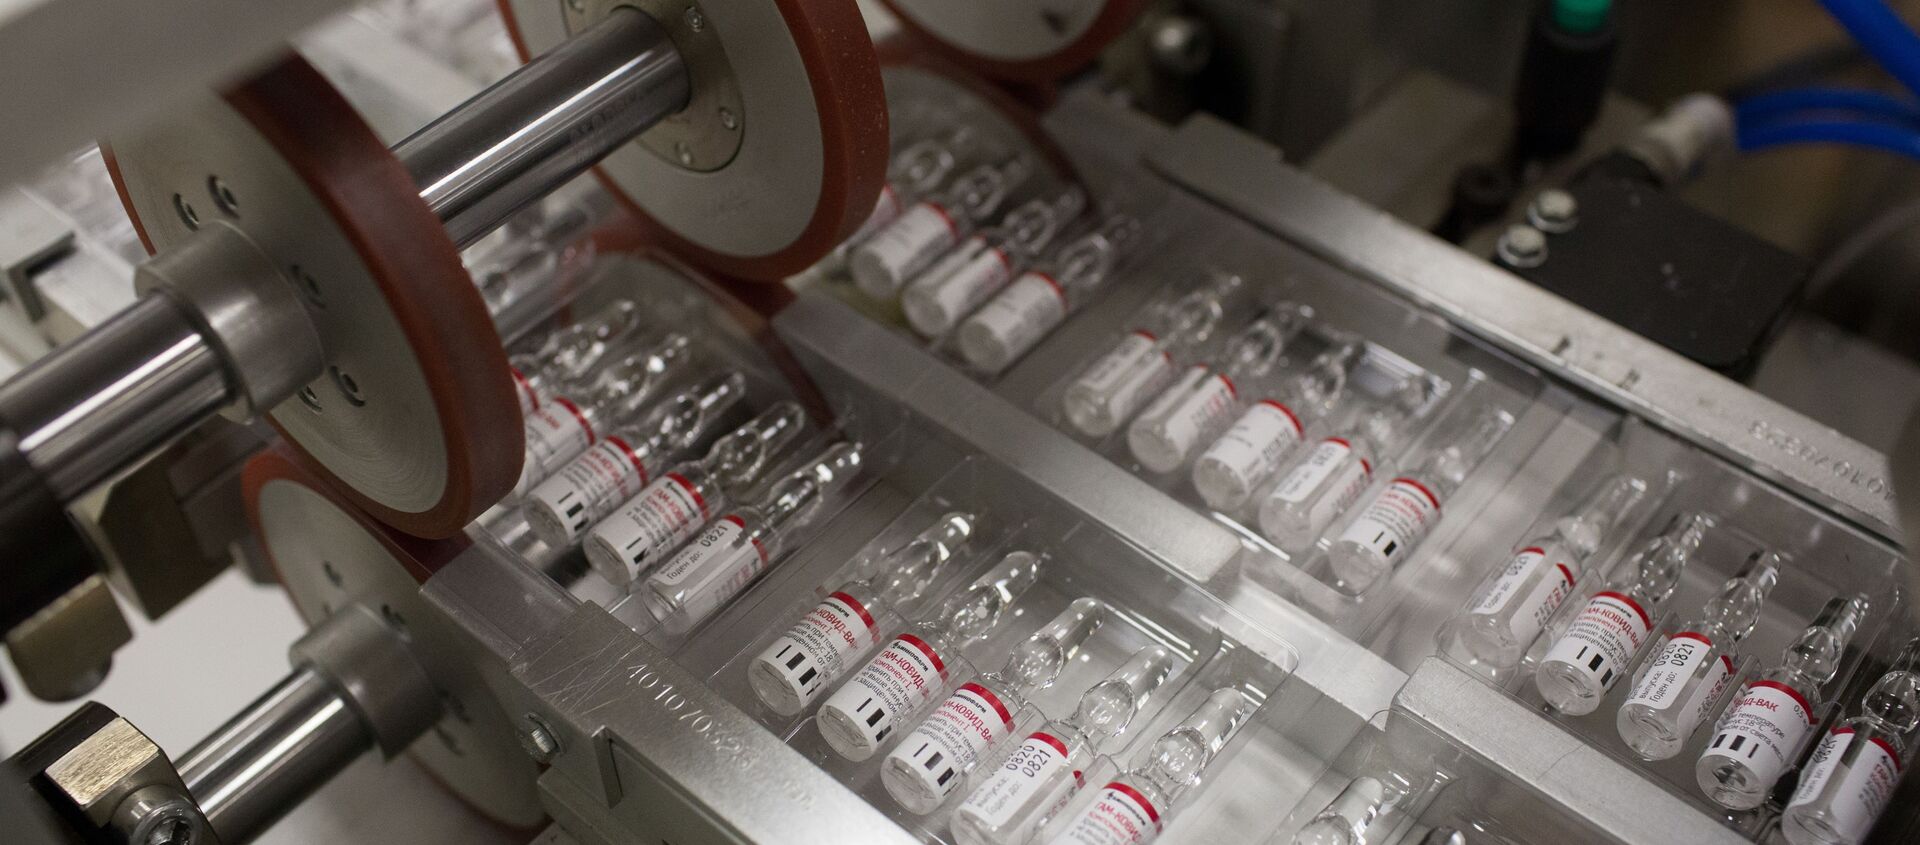 A handout photo shows vials during the production of Gam-COVID-Vac vaccine against the coronavirus disease (COVID-19), developed by the Gamaleya National Research Institute of Epidemiology and Microbiology and the Russian Direct Investment Fund (RDIF), at Binnopharm pharmaceutical company in Zelenograd near Moscow, Russia August 7, 2020 - Sputnik International, 1920